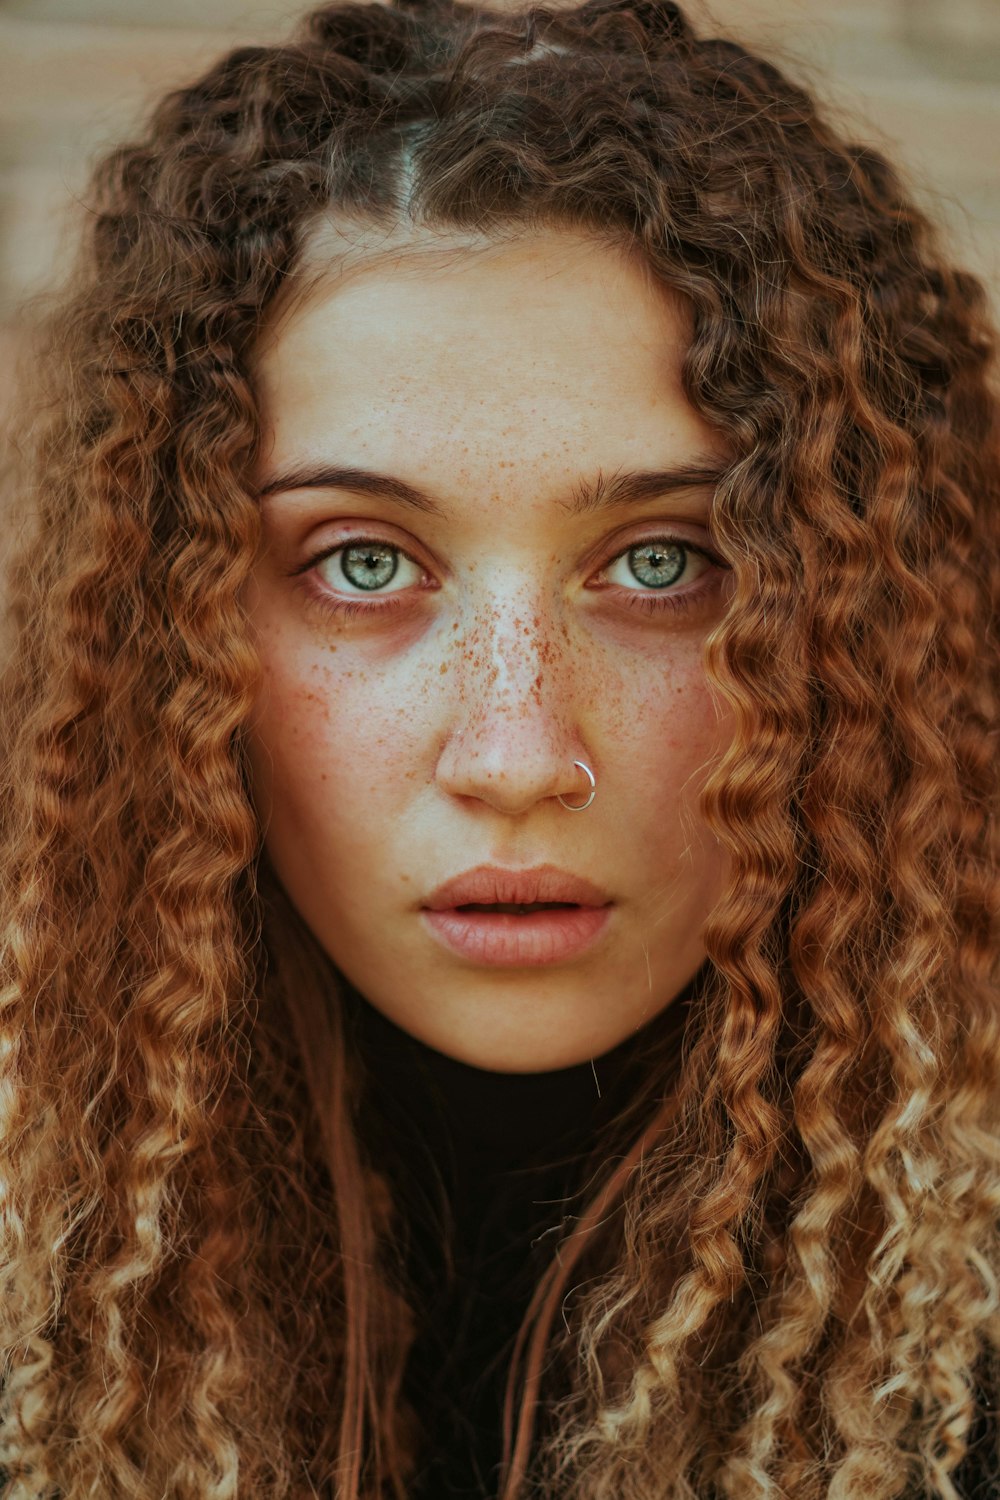 a woman with freckles and freckles on her face